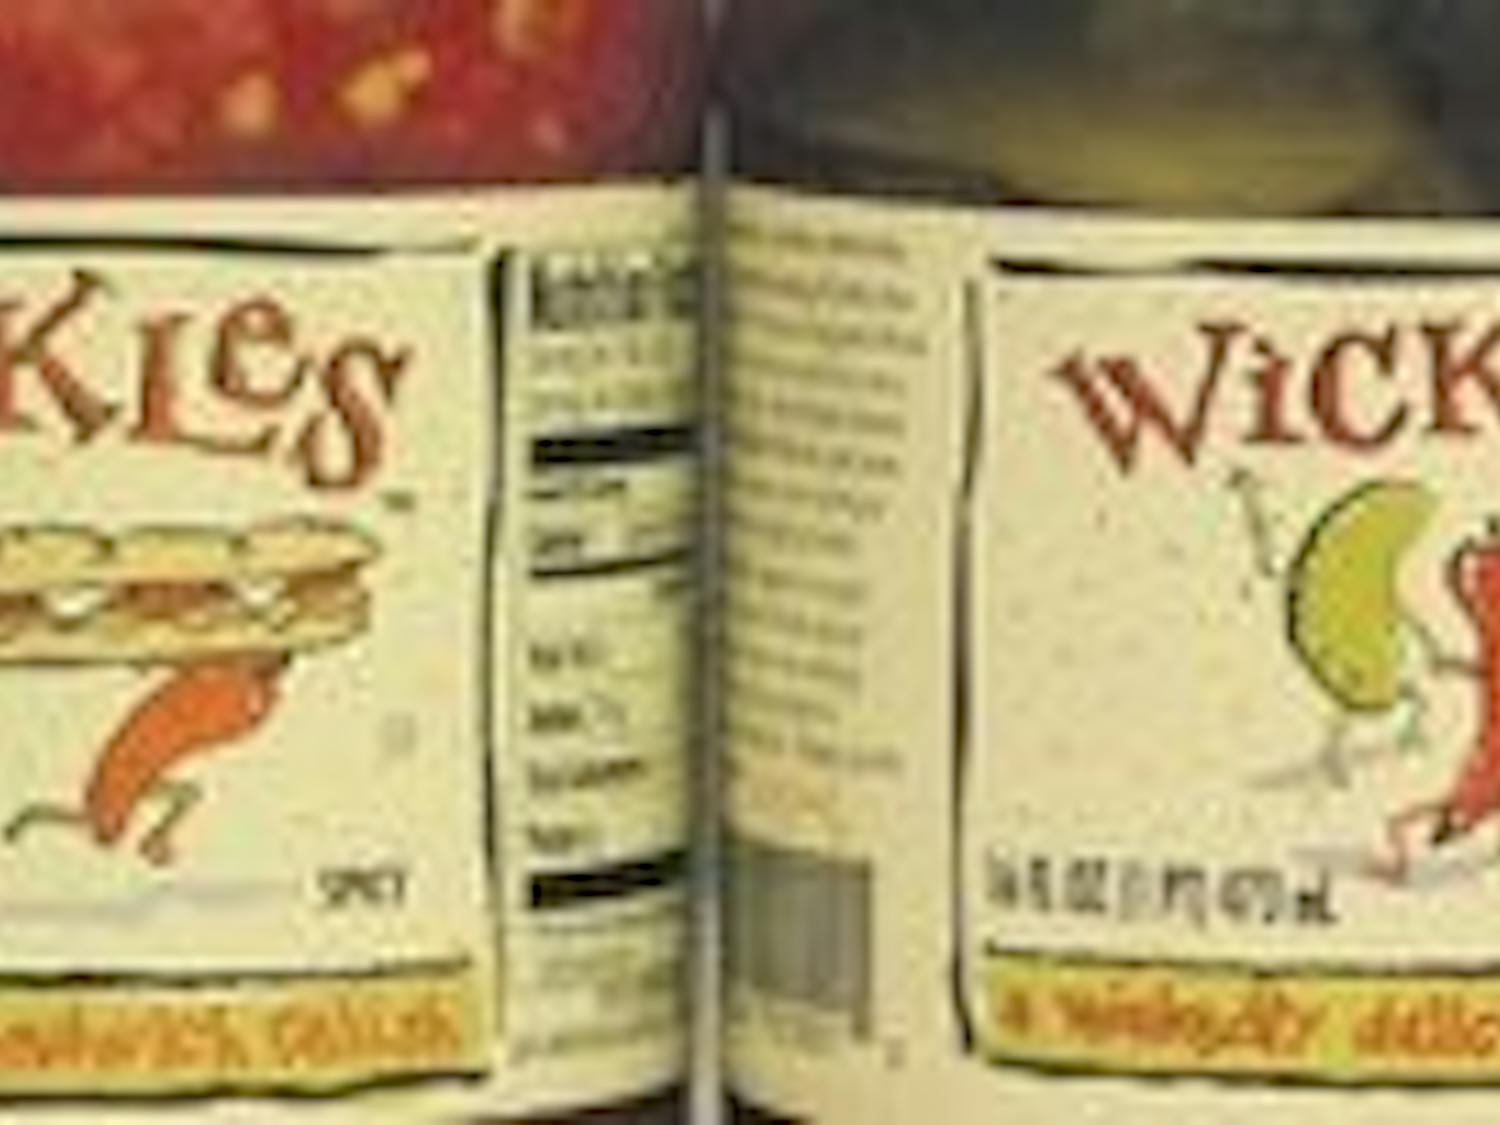 The jar artwork is signature to Sims Food Inc. The dancing pepper and pickle were drawn by Auburn native and longtime friend of Will, Trey and Anderson, Matt Harris. (Melody Kitchens / SPECIAL SECTIONS EDITOR)